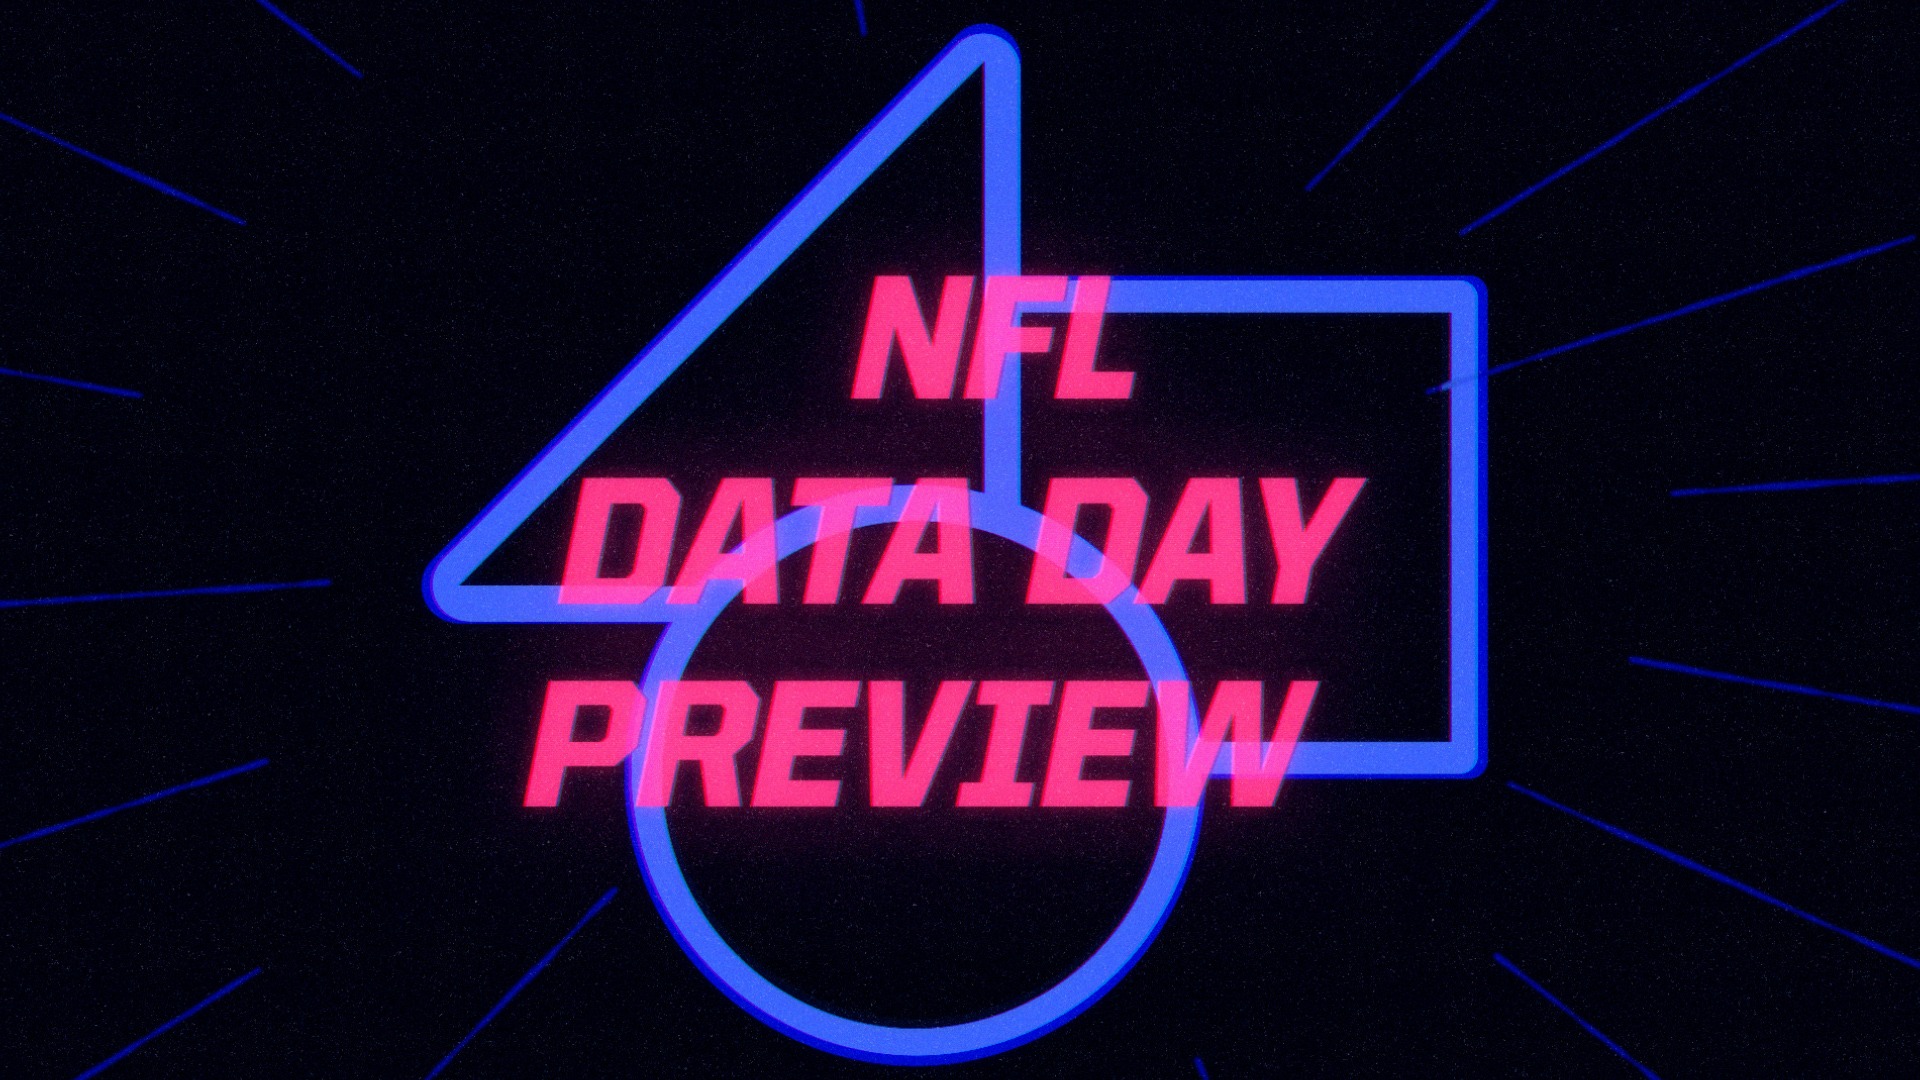 NFL Week 5 Preview | The Data Day | Packers, Giants in London